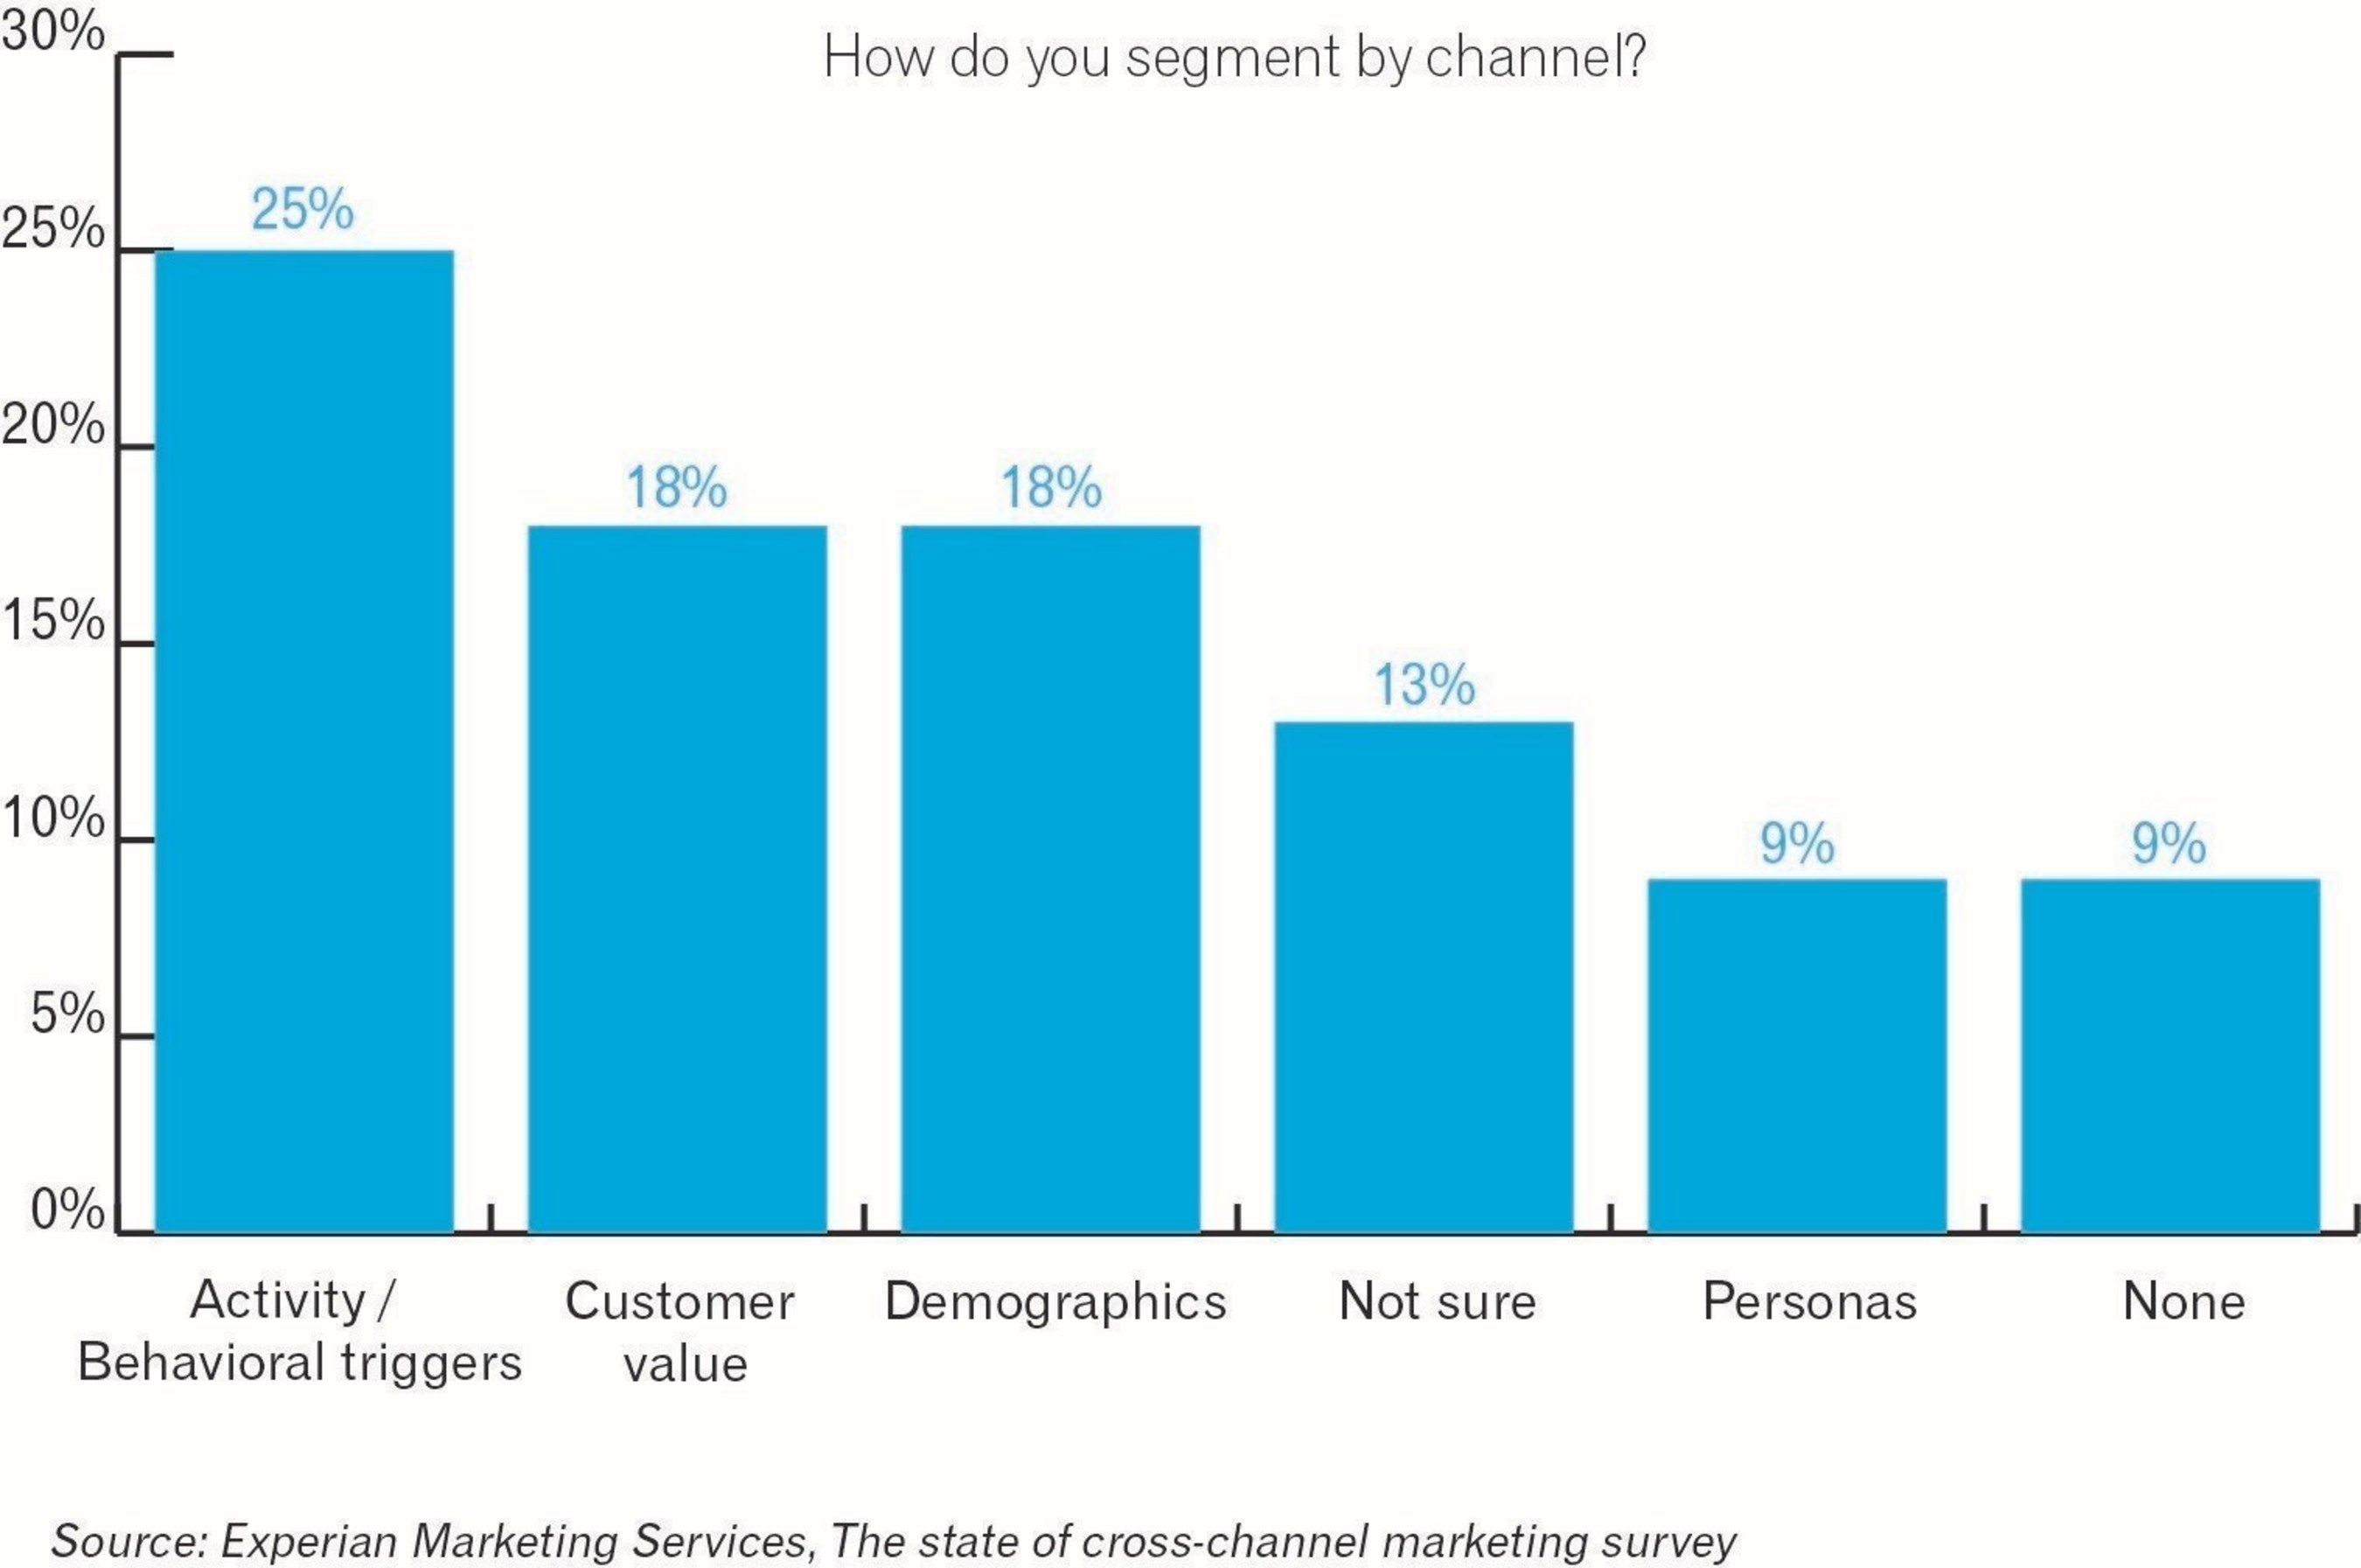 When it comes to email marketing, marketers are 6 percent more likely to execute some form of email segmentation than in 2013.